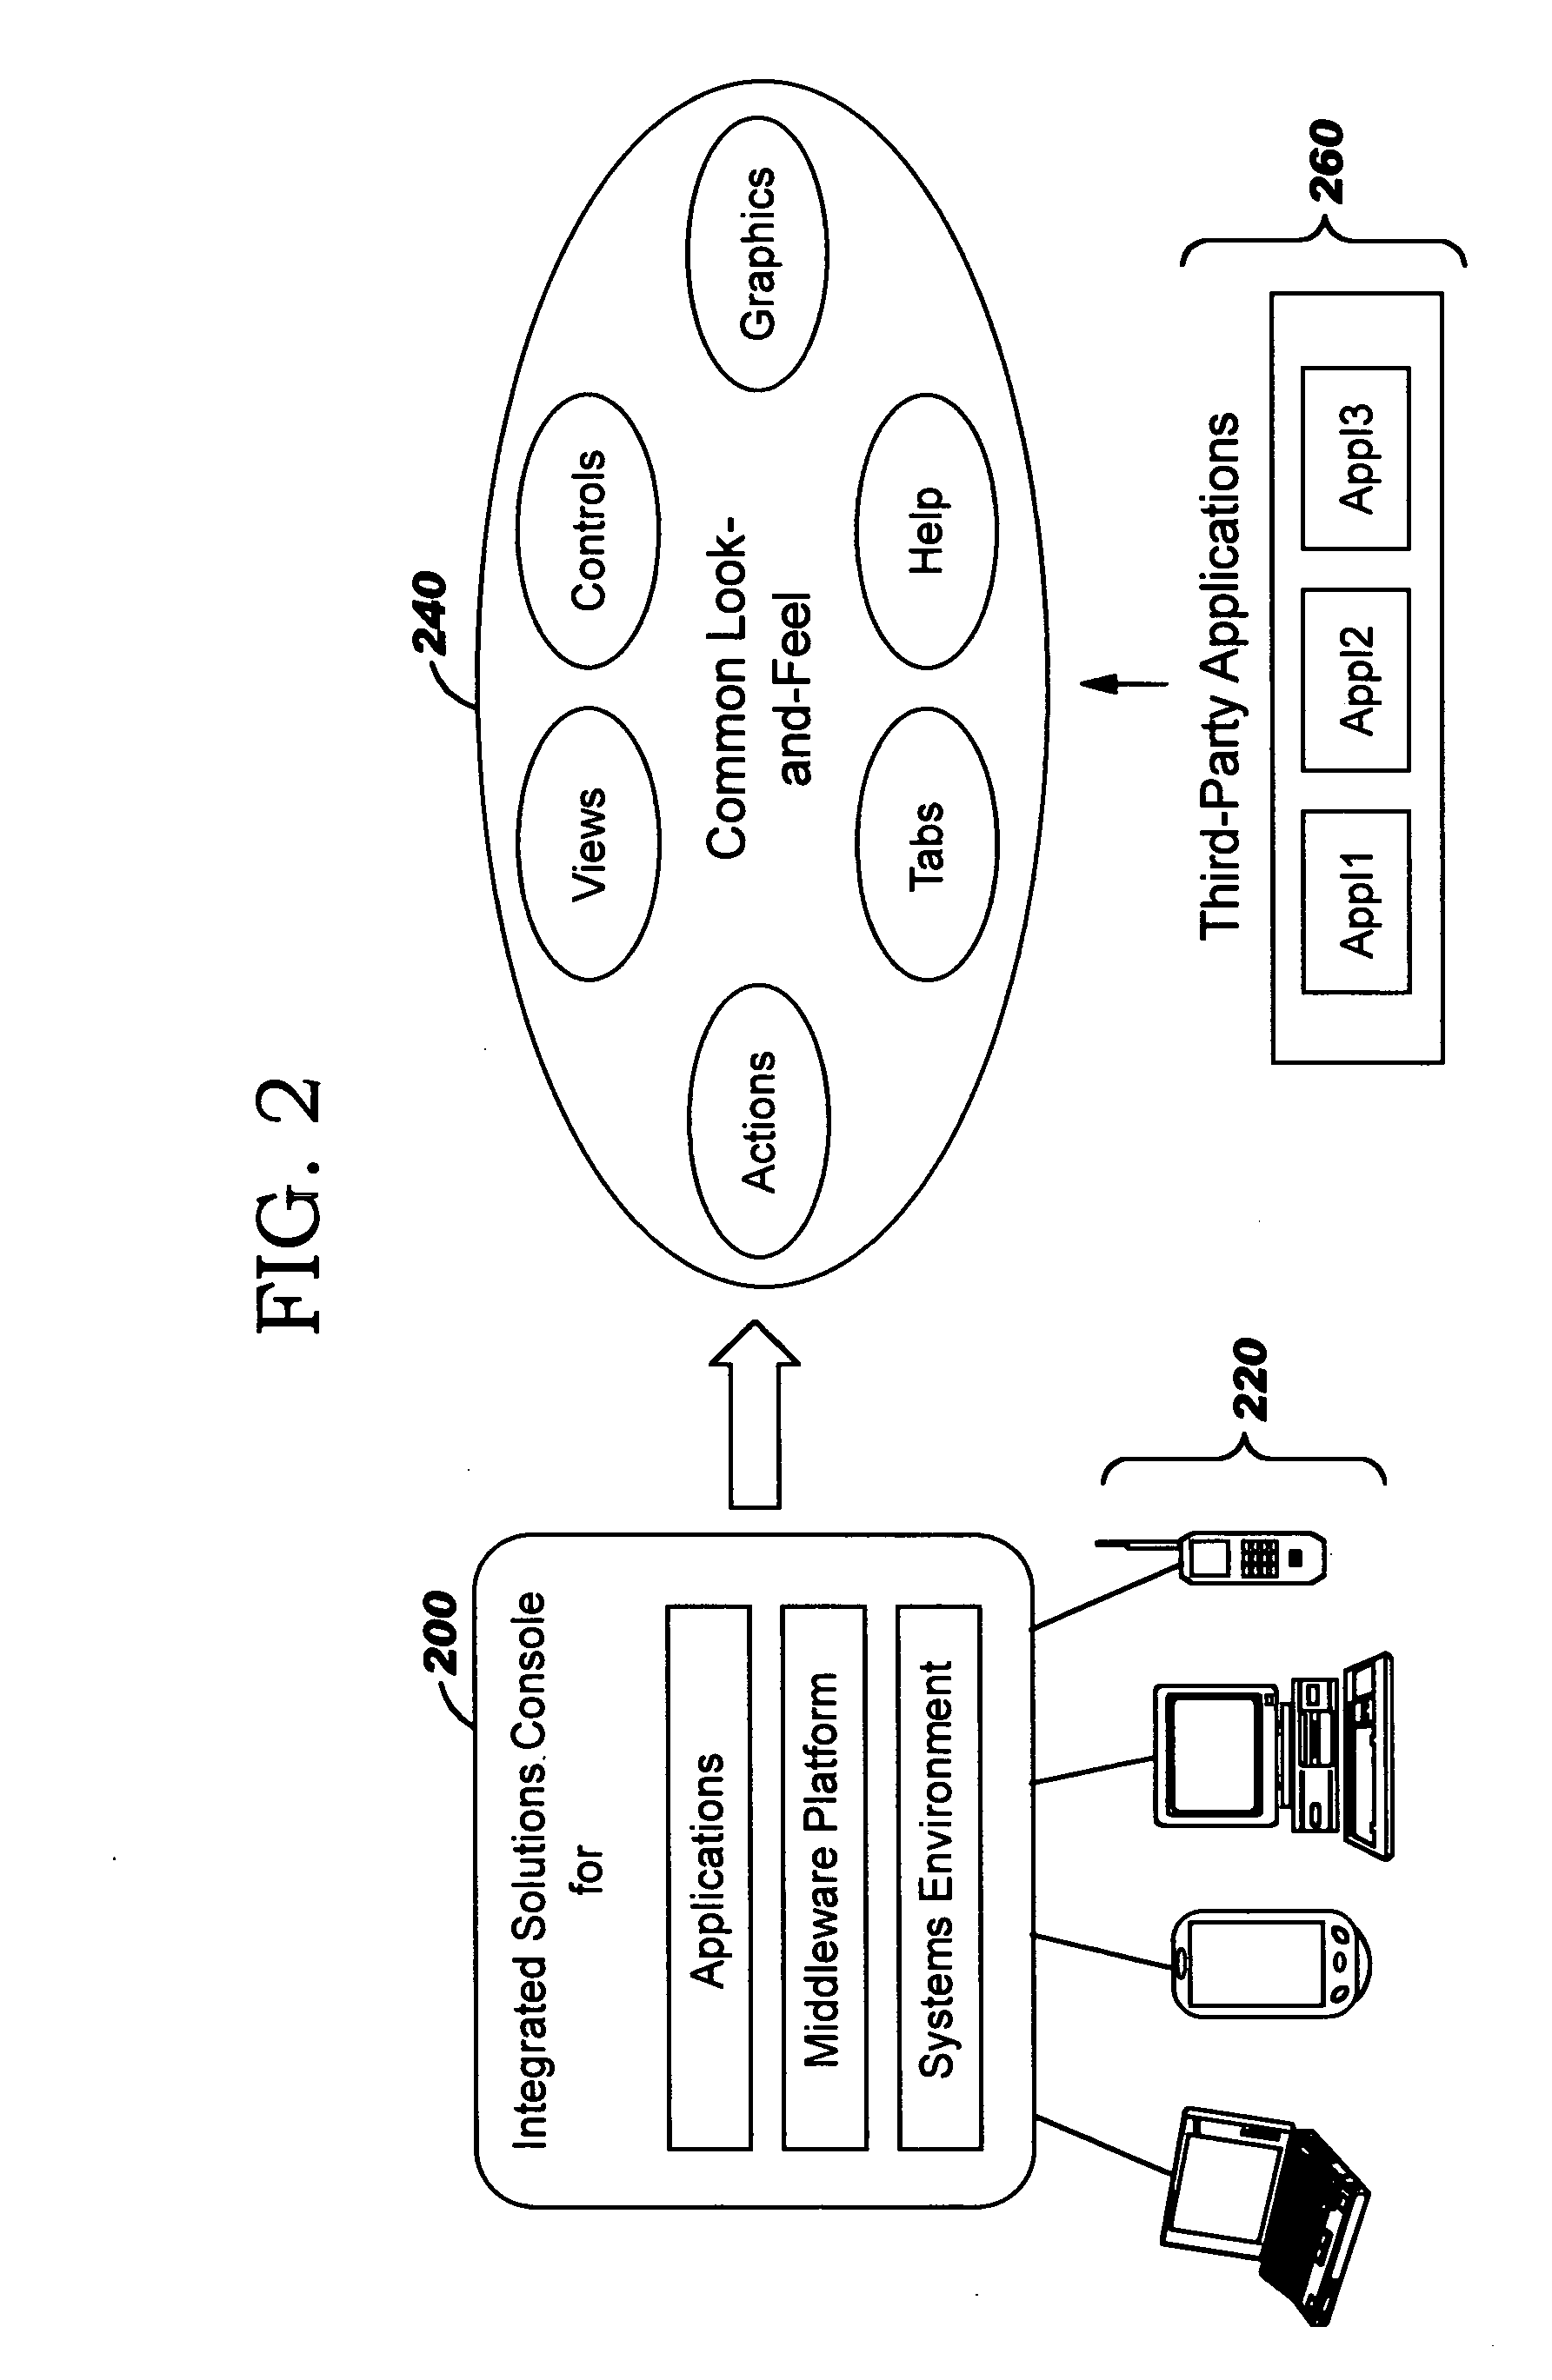 Using content aggregation to build administration consoles